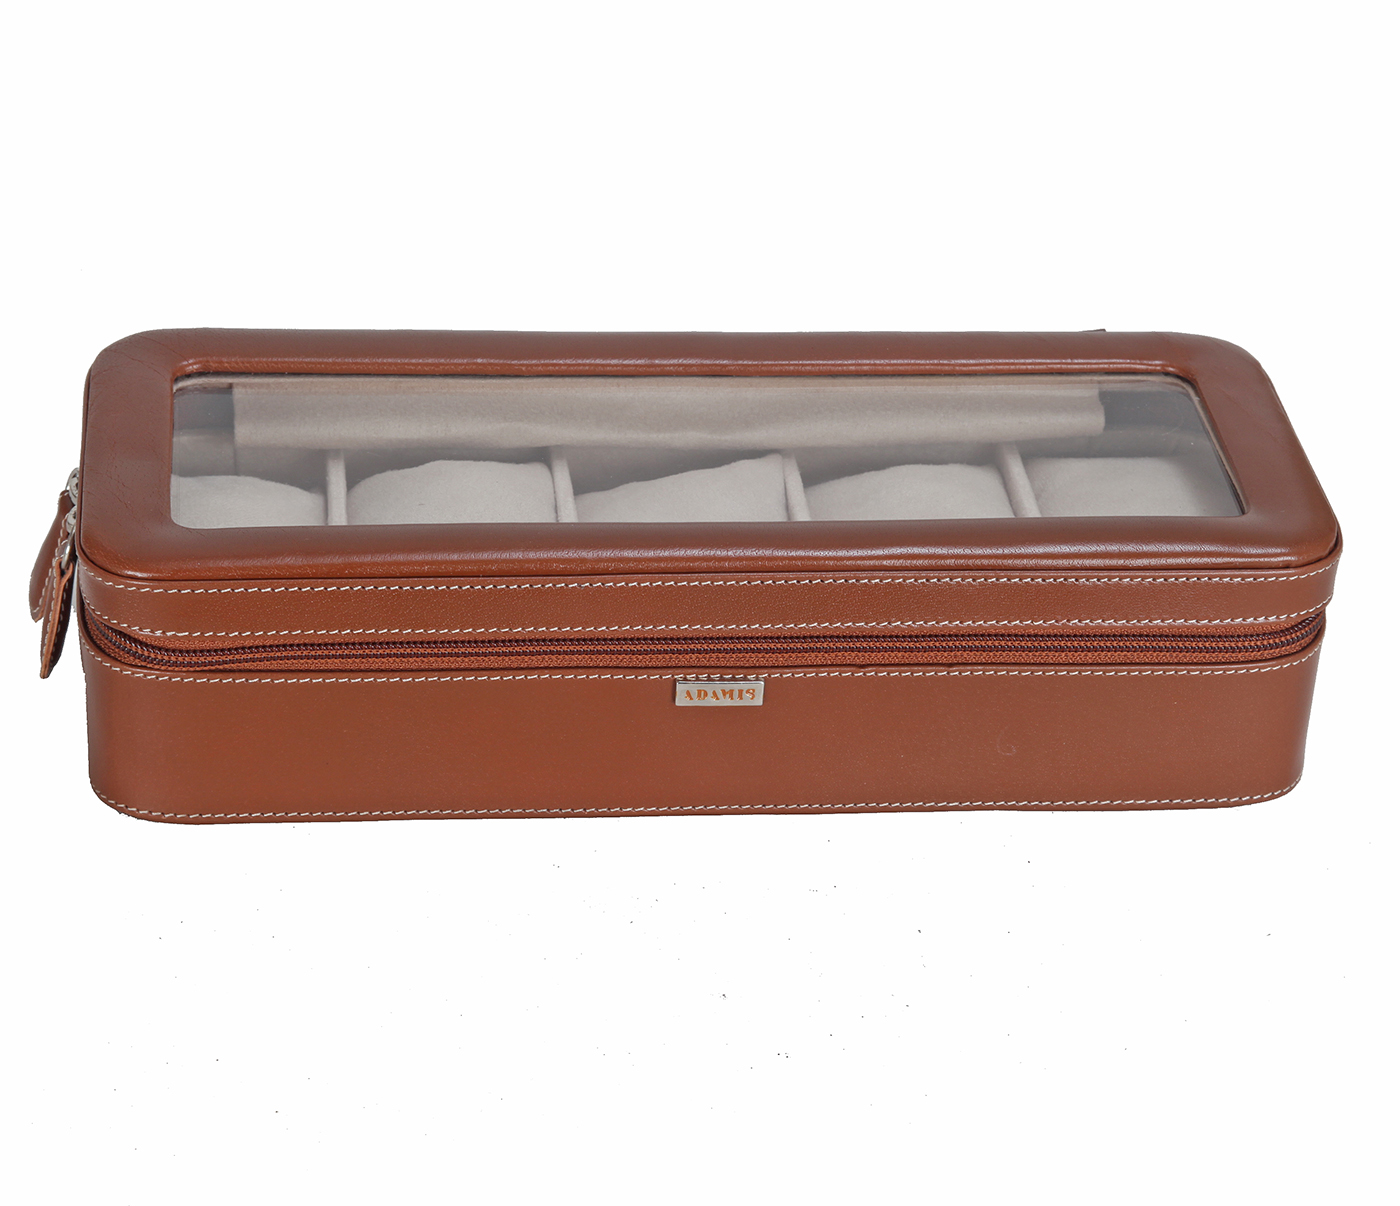 W277--Watch case to hold 5 watches in Genuine Leather - Tan